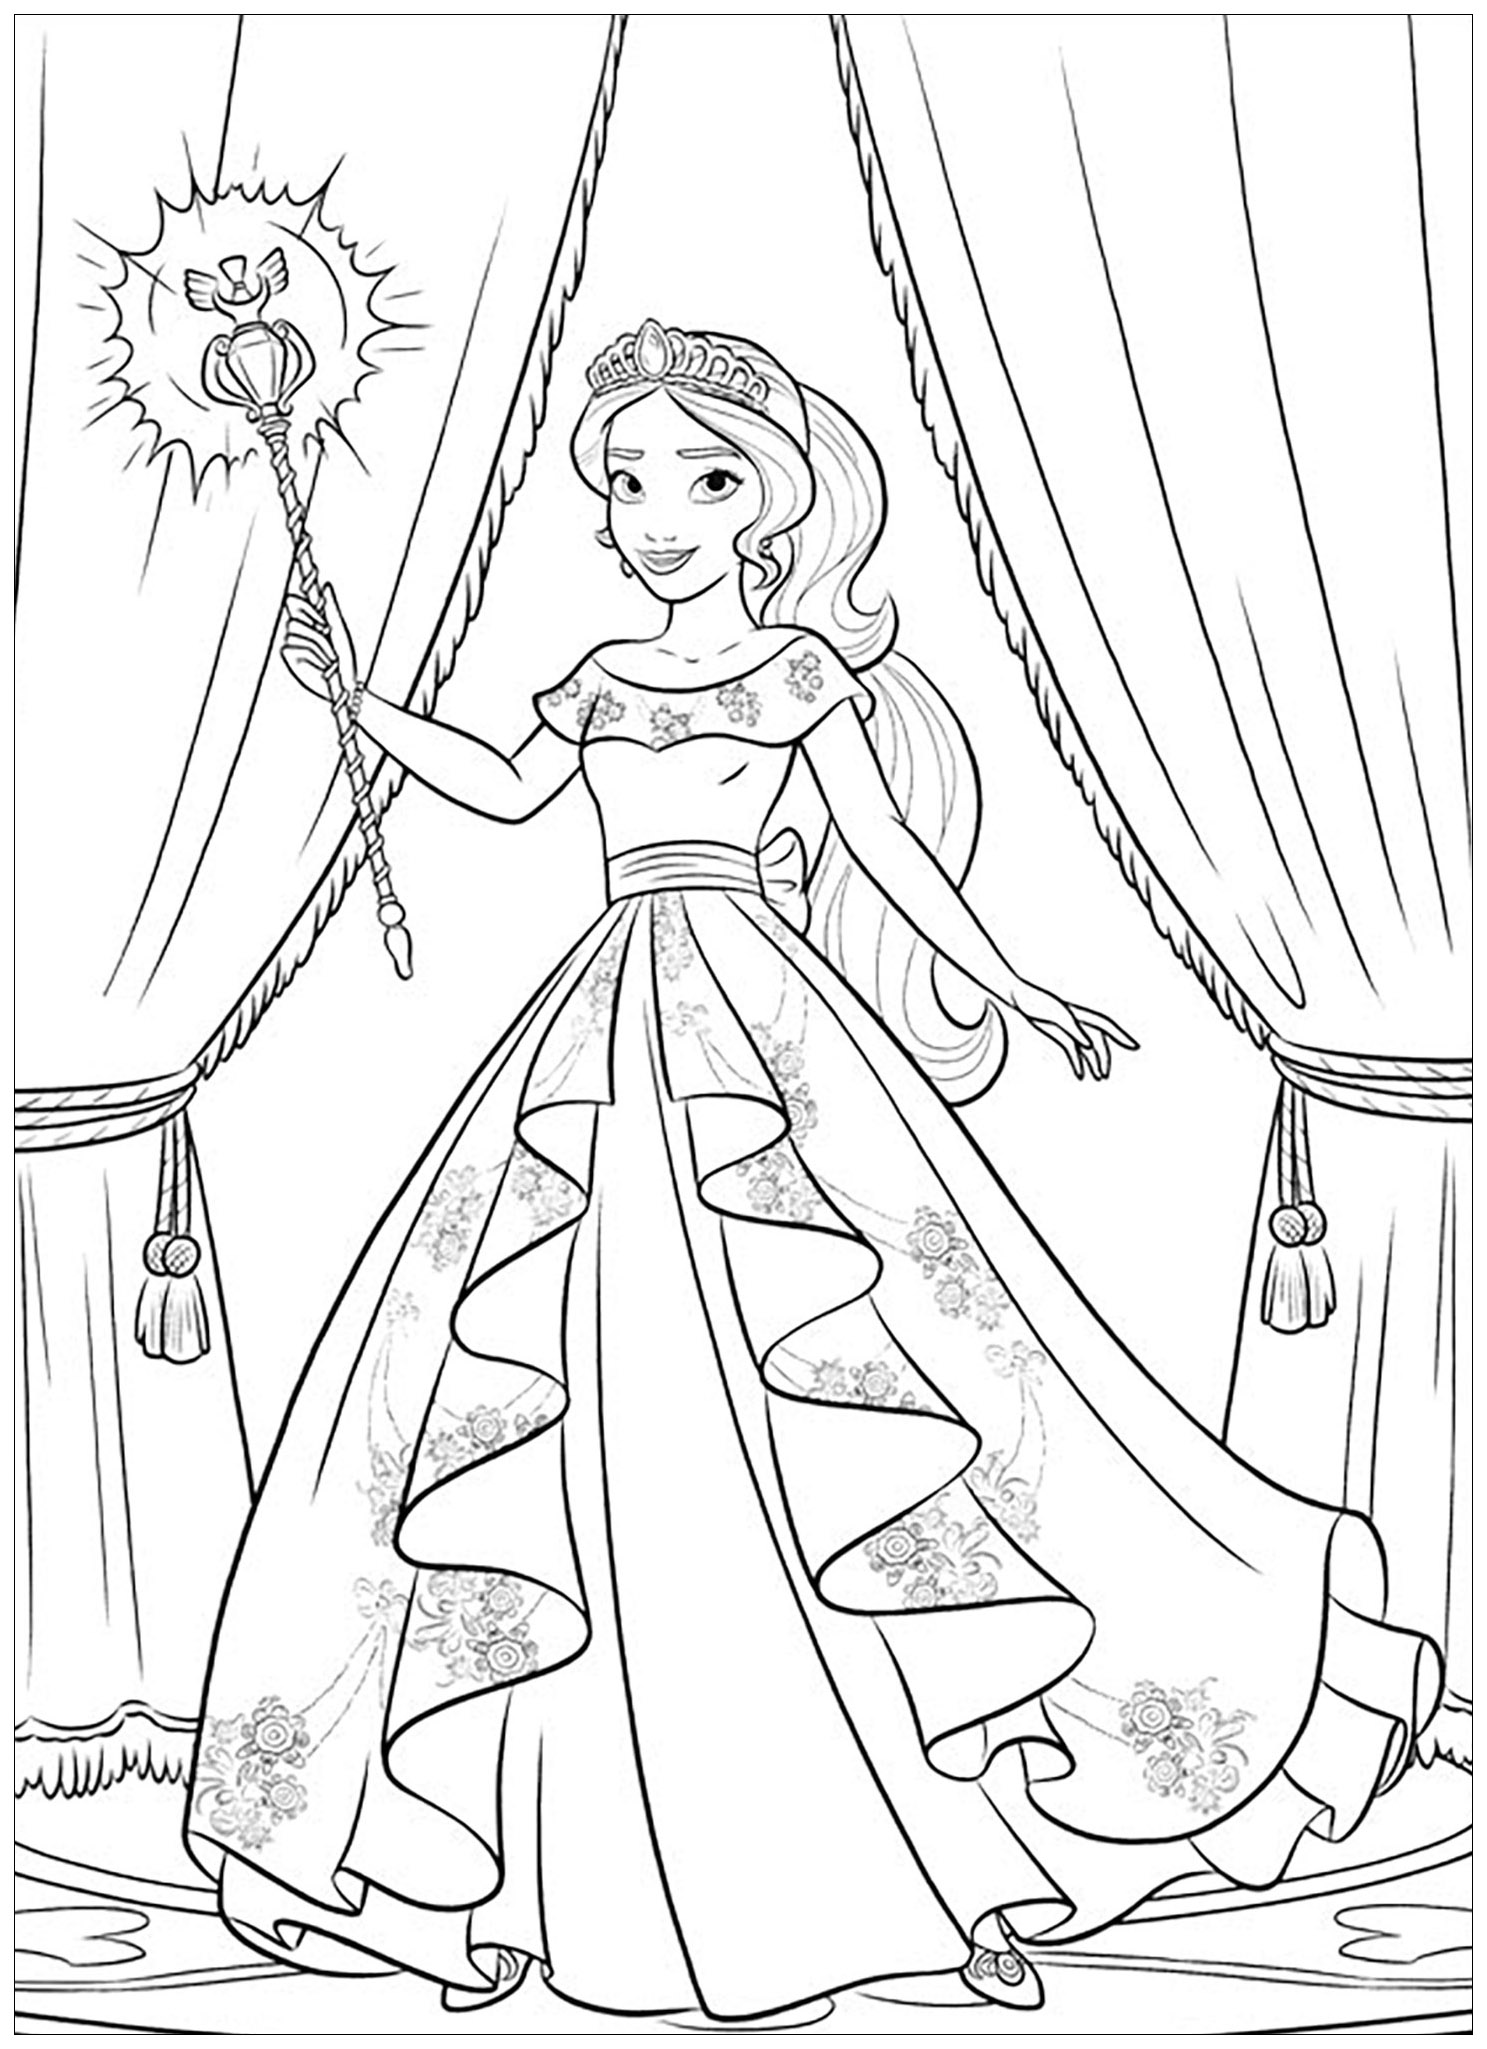 590 Animal Elena Of Avalor Coloring Pages for Kindergarten